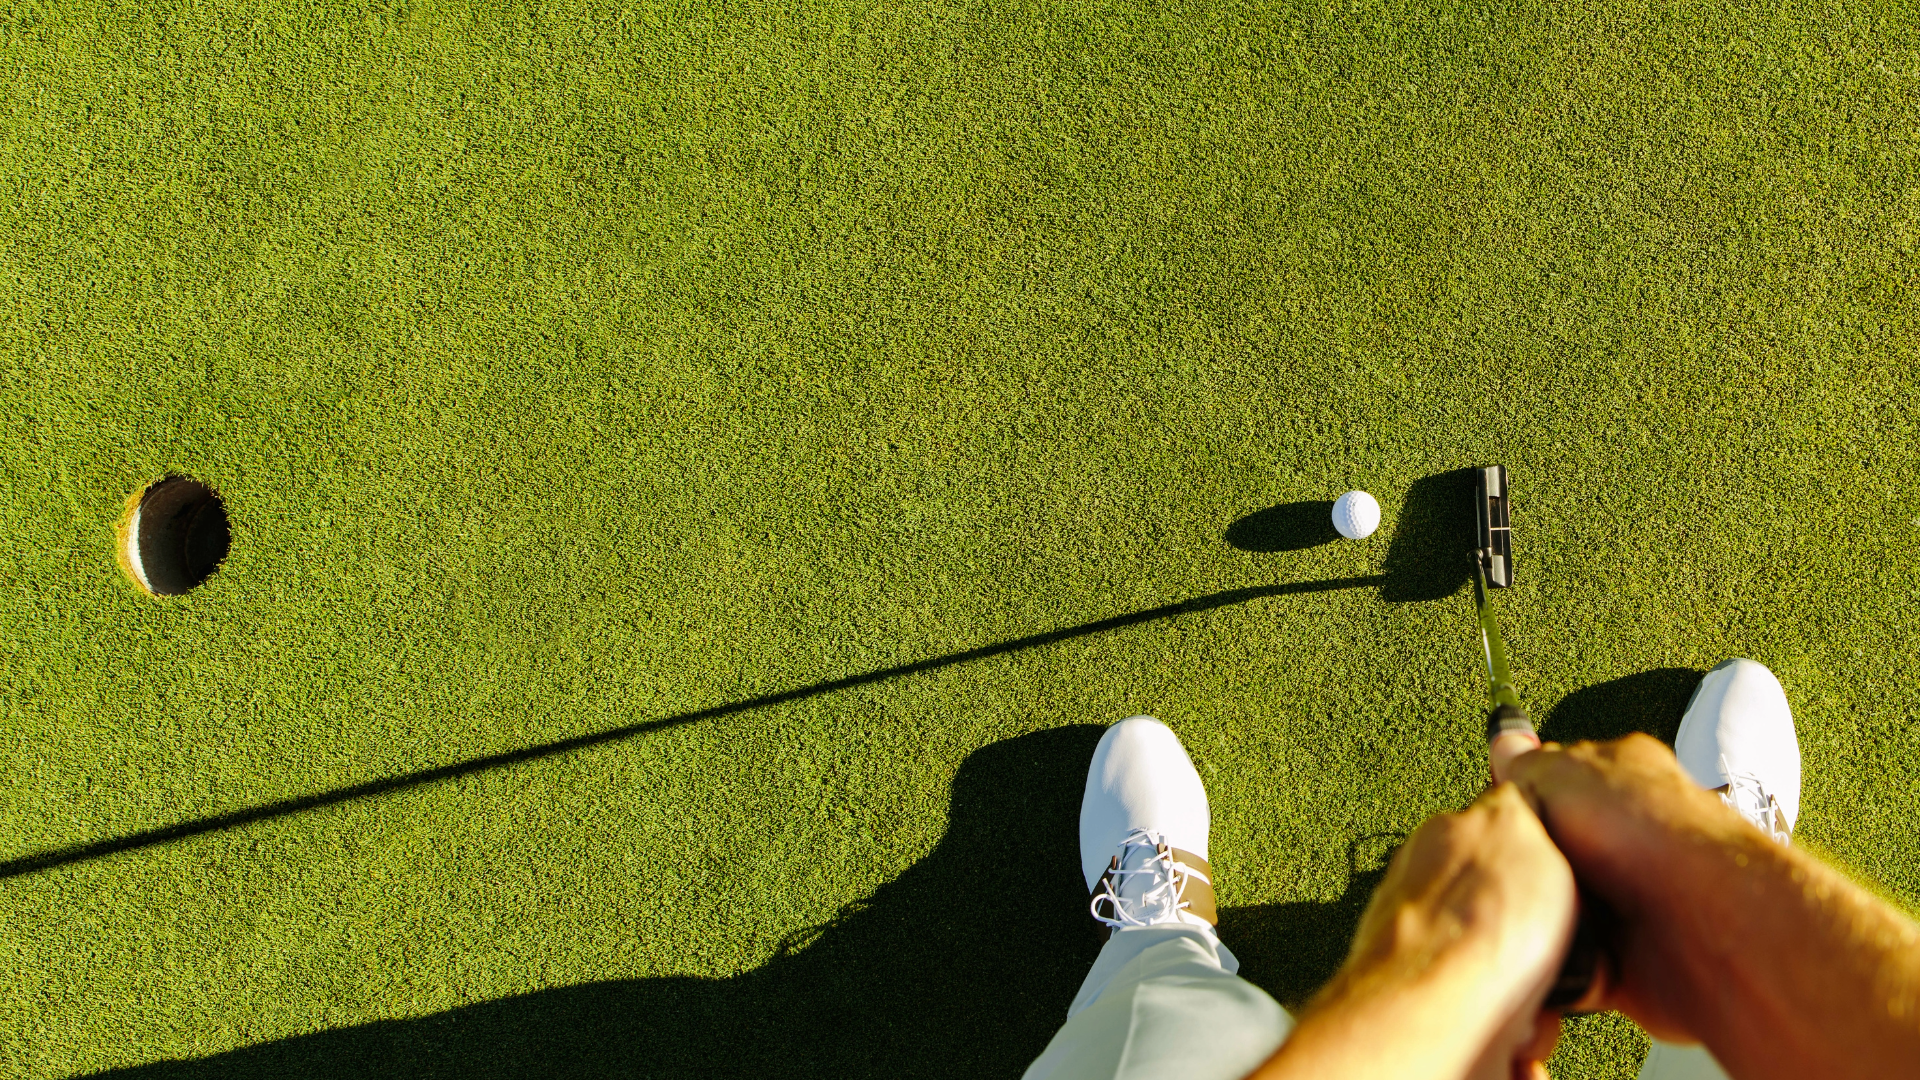 Top down view of golfer about to putt